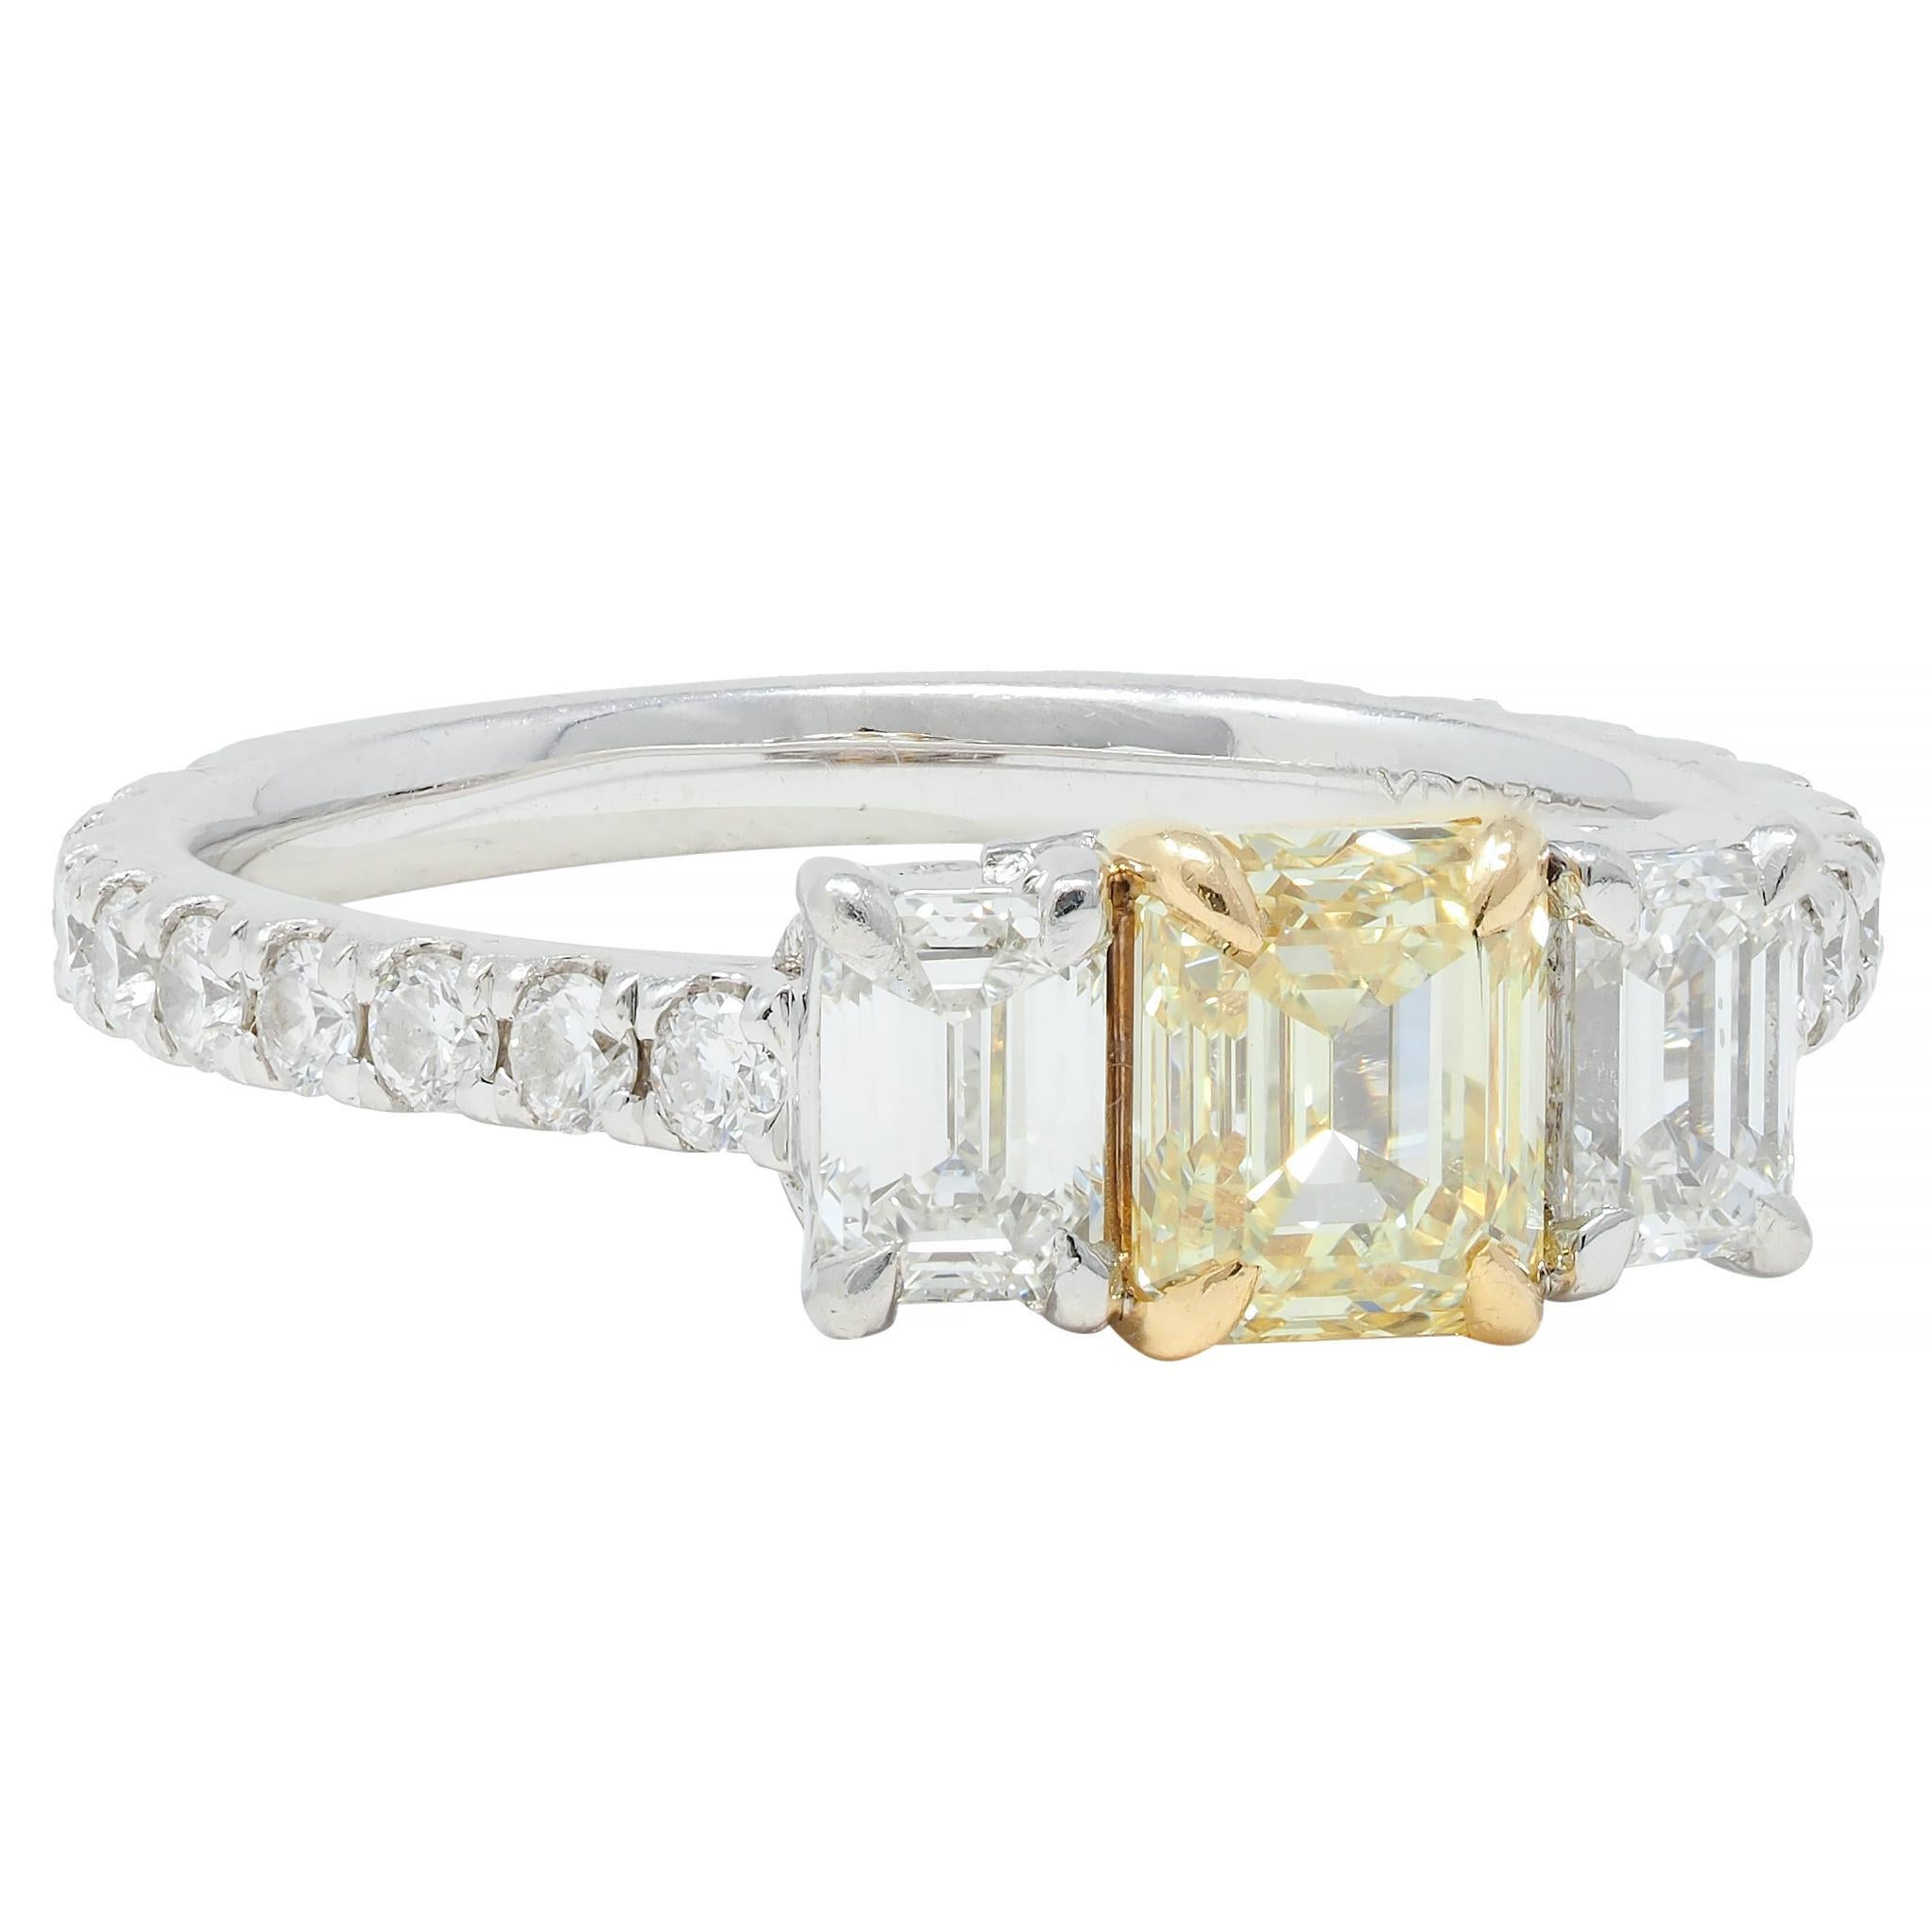 Centering an emerald cut diamond weighing 0.75 carat - fancy light yellow in color with VS2 clarity
Set in yellow gold talon prongs and flanked by two additional emerald cut diamonds
Weighing 0.48 carat total - G color with VS2 clarity and prong set